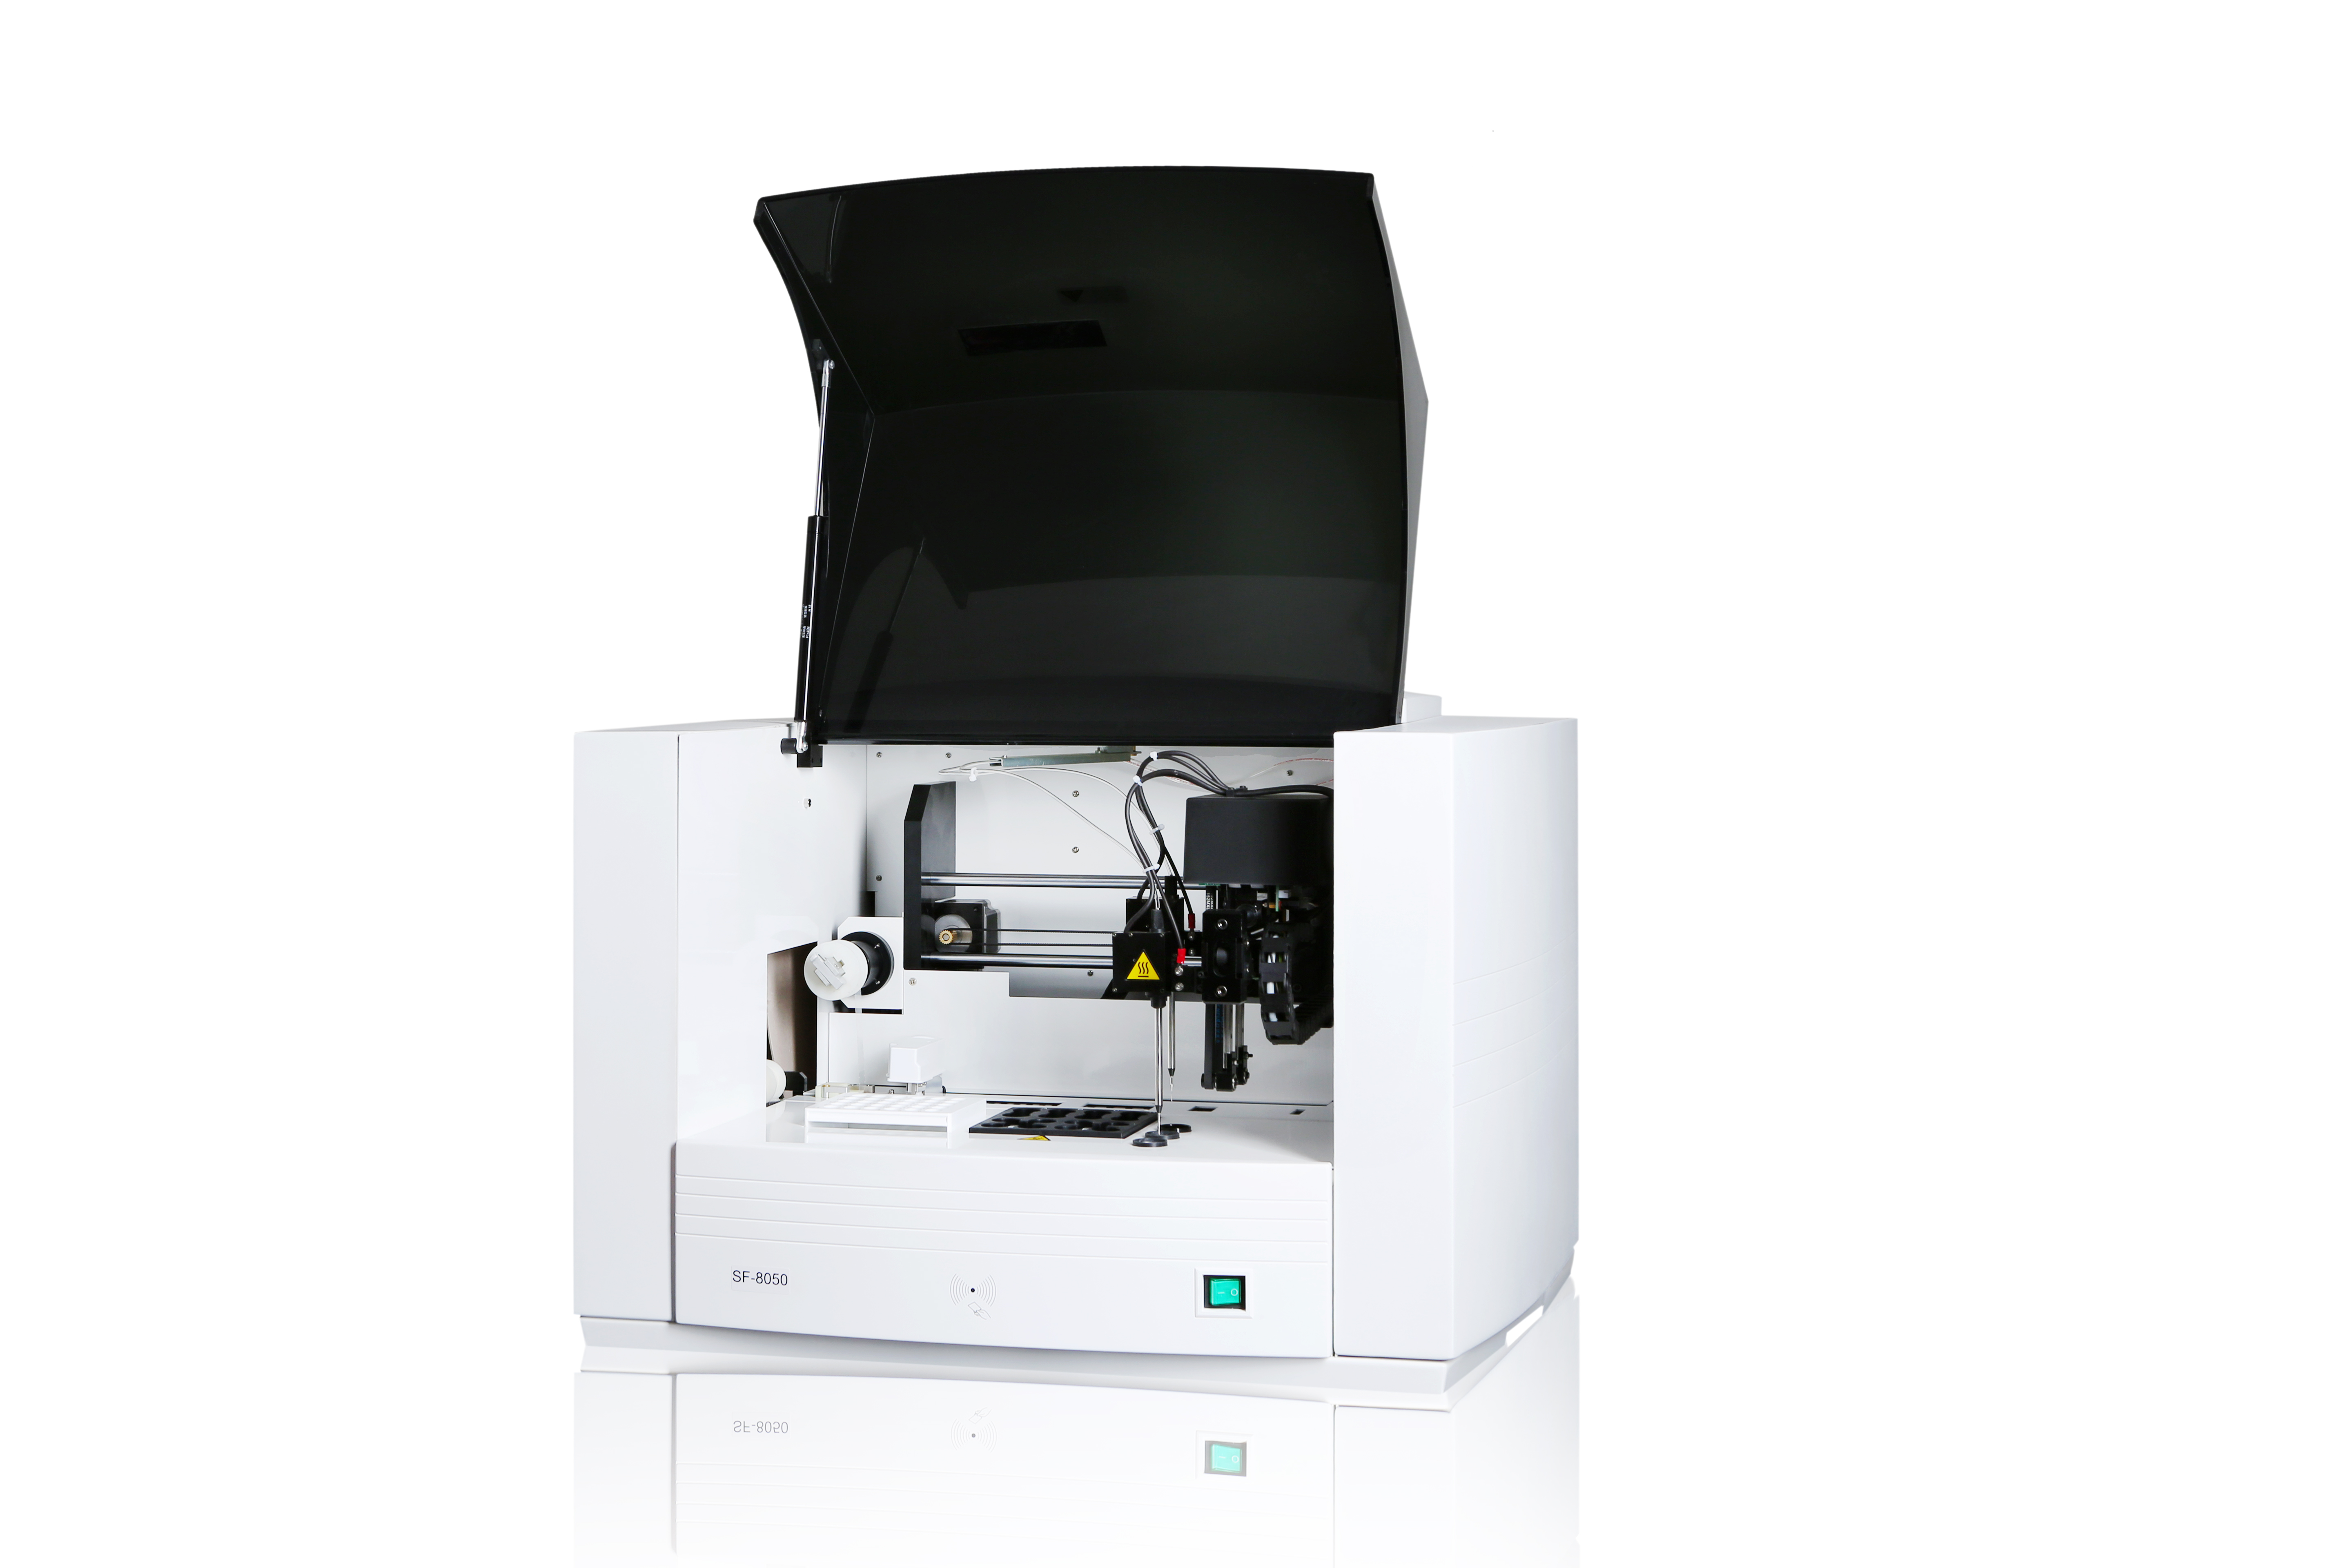 https://www.succeeder.com/sf-8050-fully-automated-coagulation-analyzer-sf-8050-product/